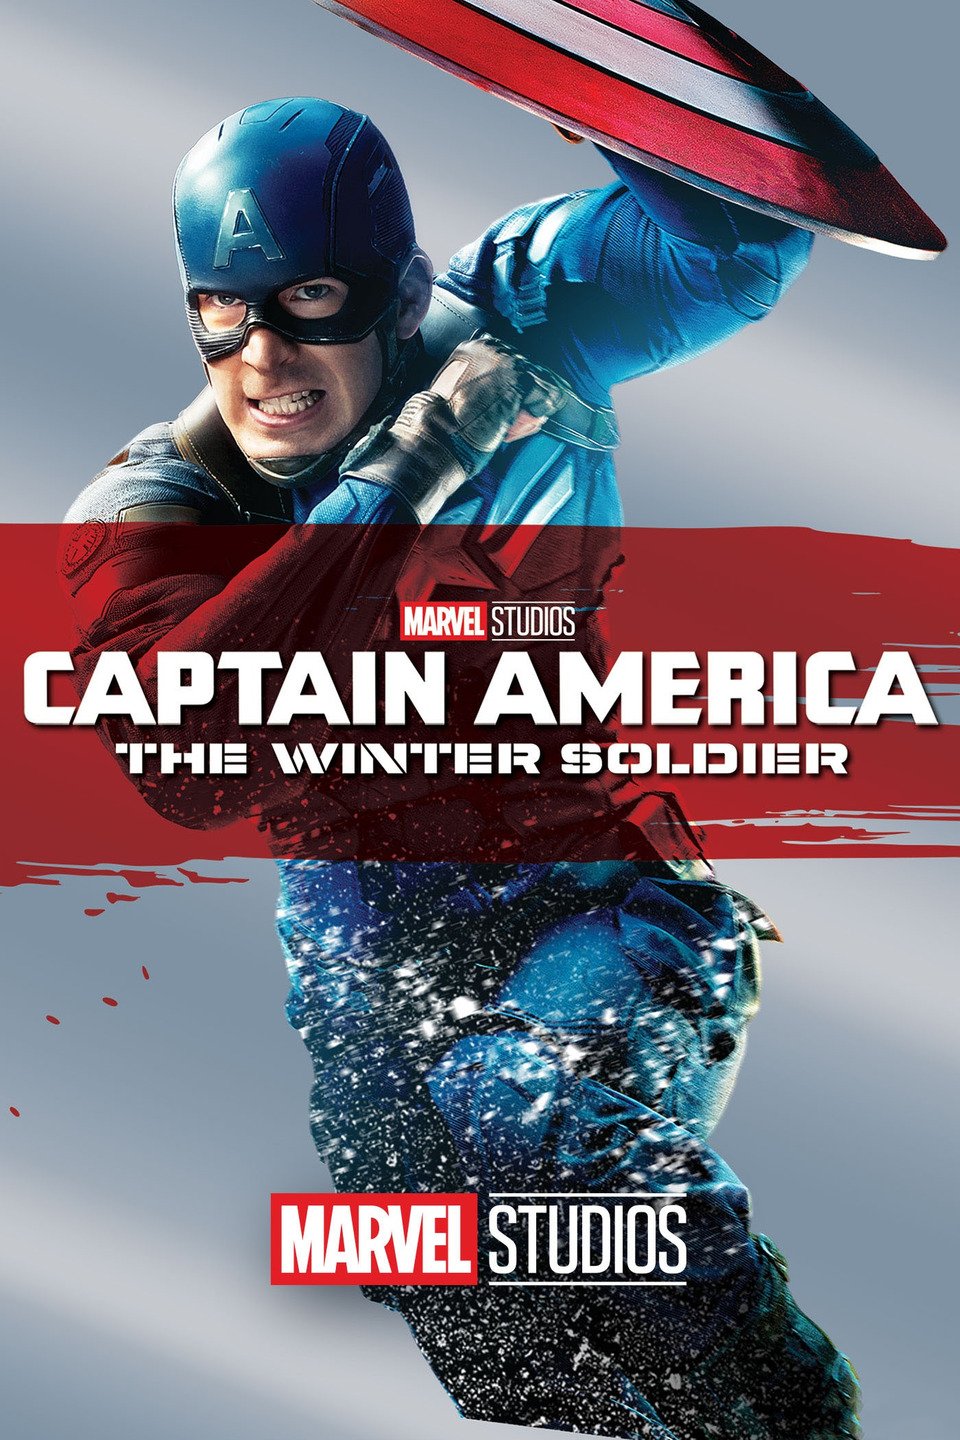 Captain America: The Winter Soldier poster